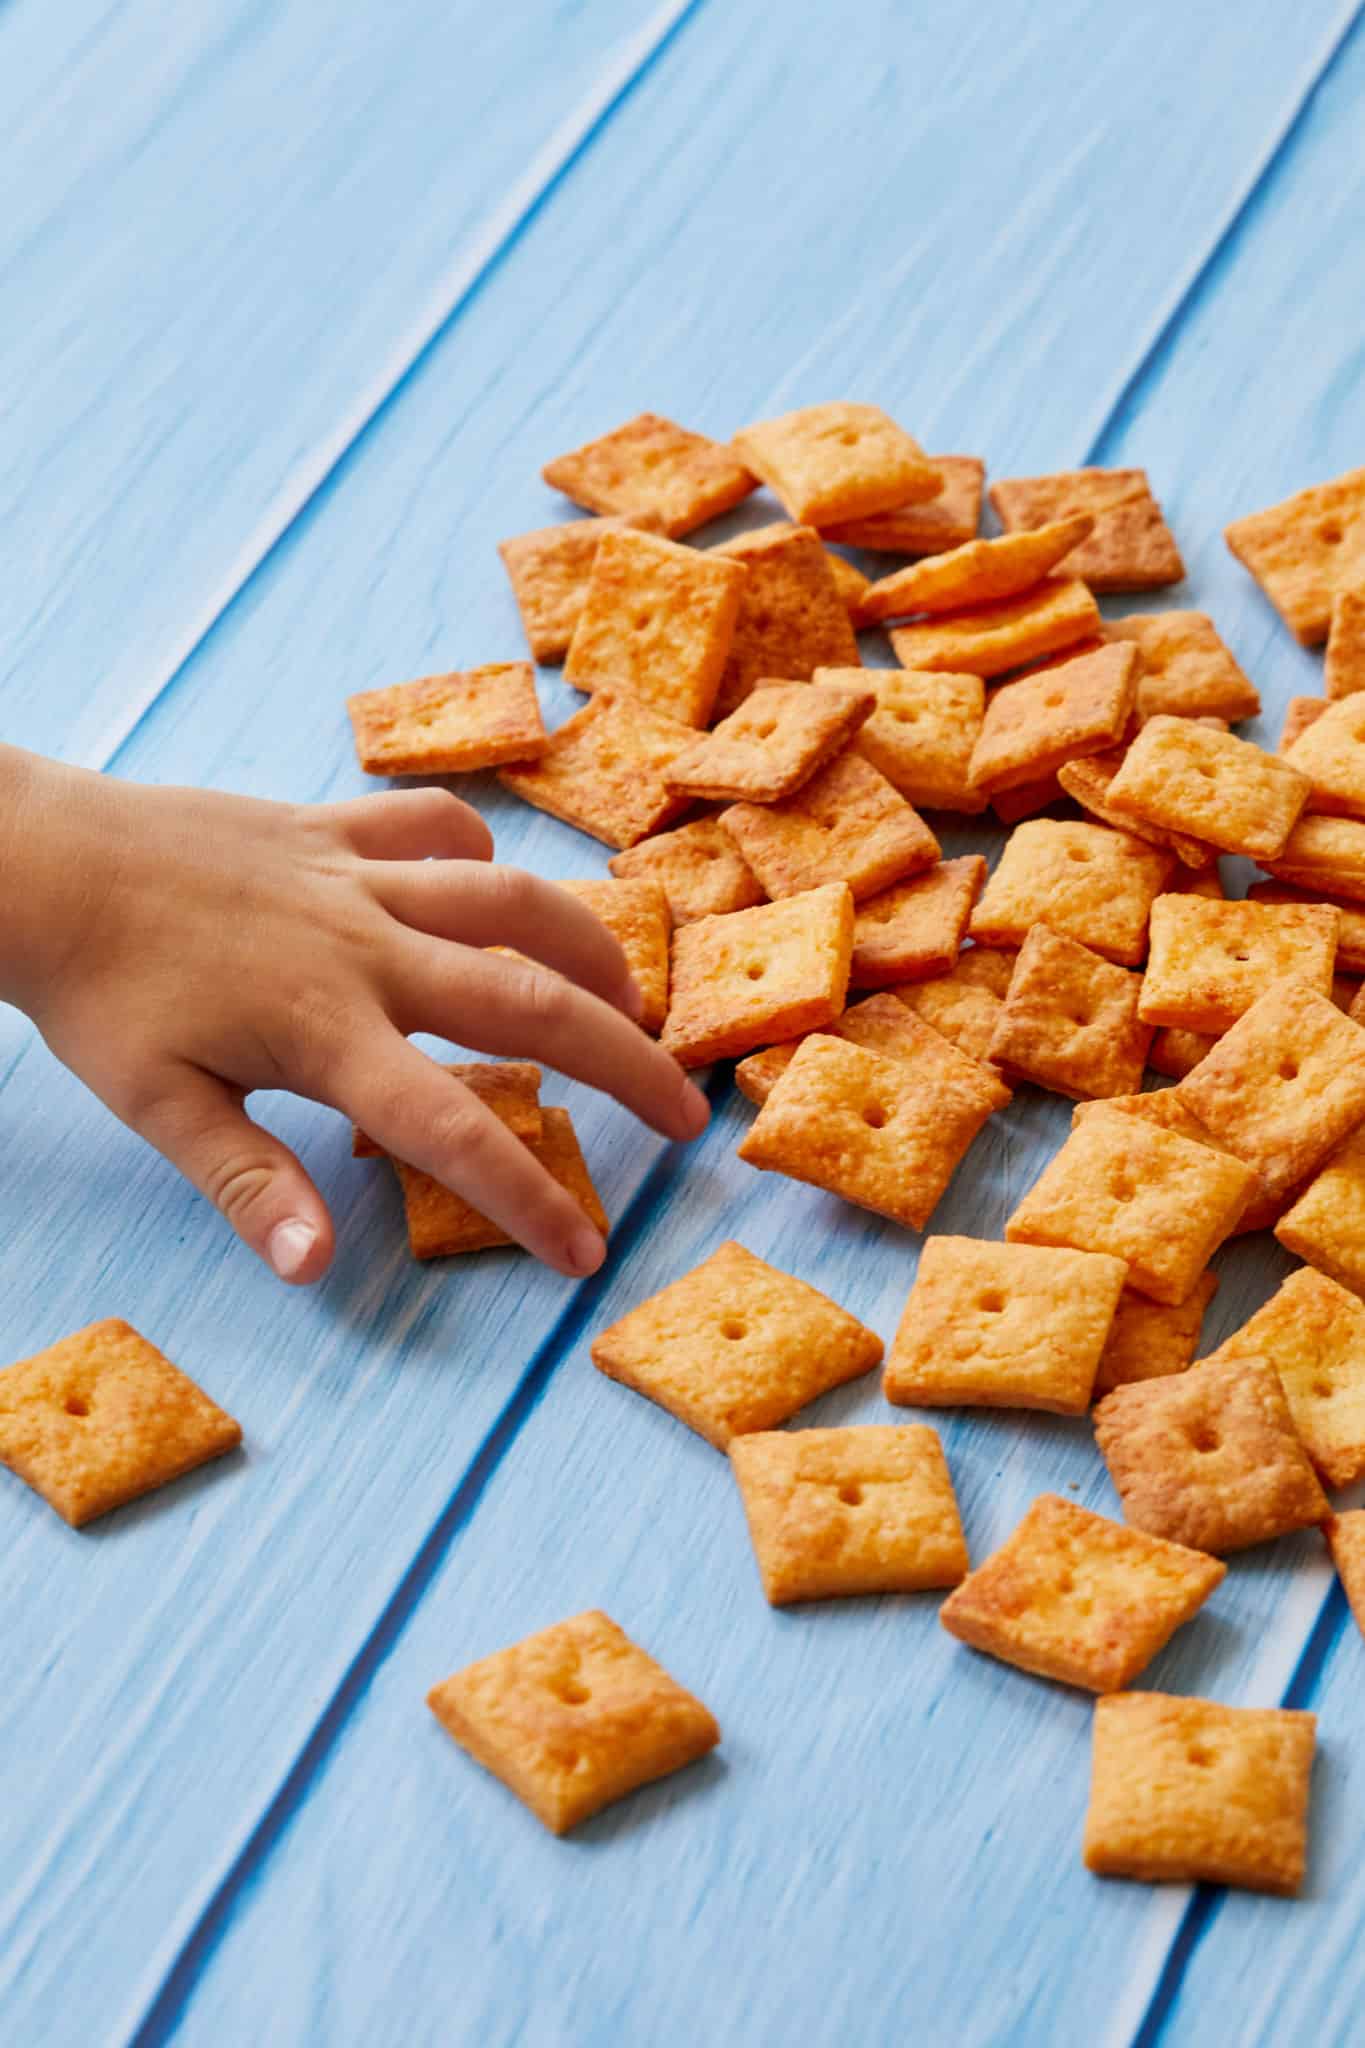 A child's hand reaches out to grab a few homemade Cheez-Its from a pile. The cheesy crackers are orange with a hole in the center.